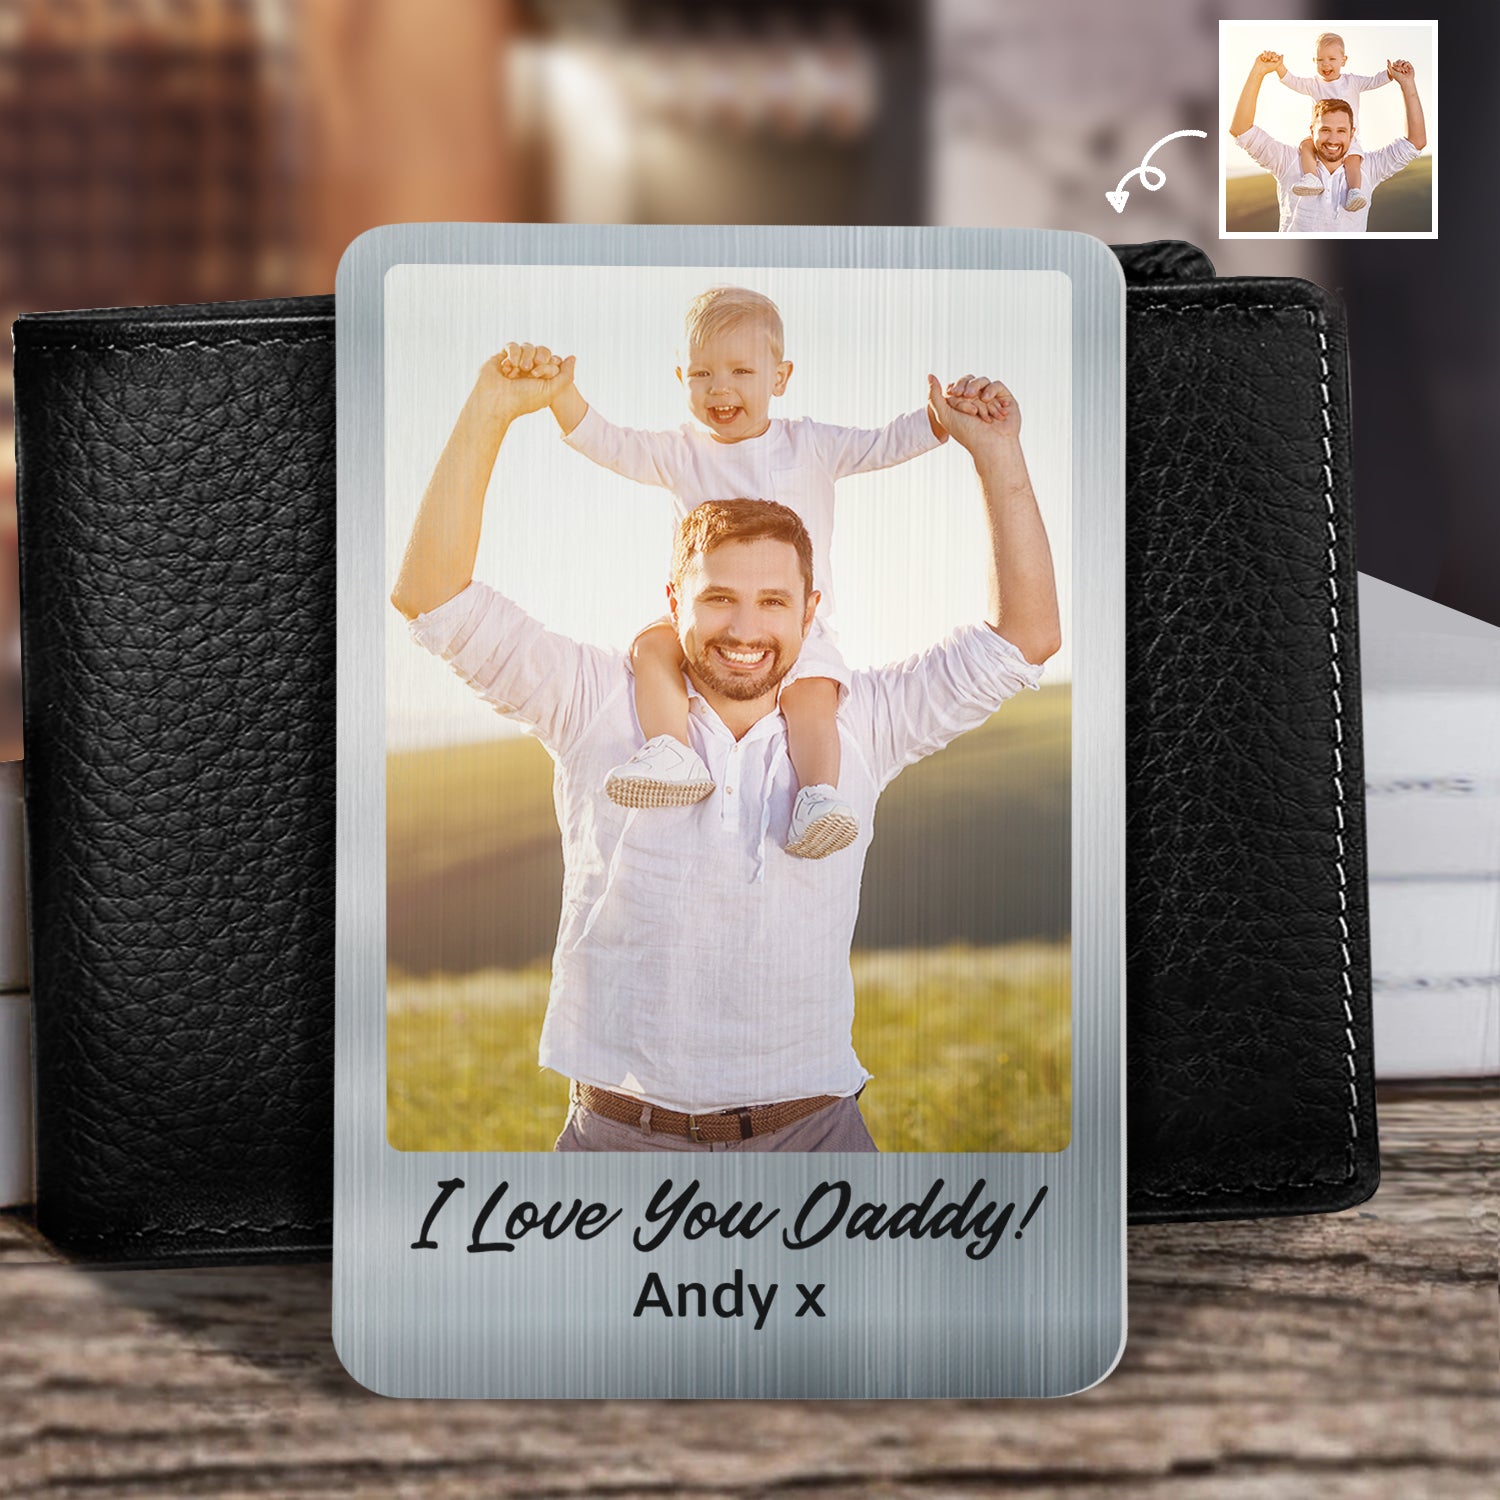 Custom Photo - Gift For Dad, Mom, Family, Siblings, Friends, Couples - Personalized Aluminum Wallet Card